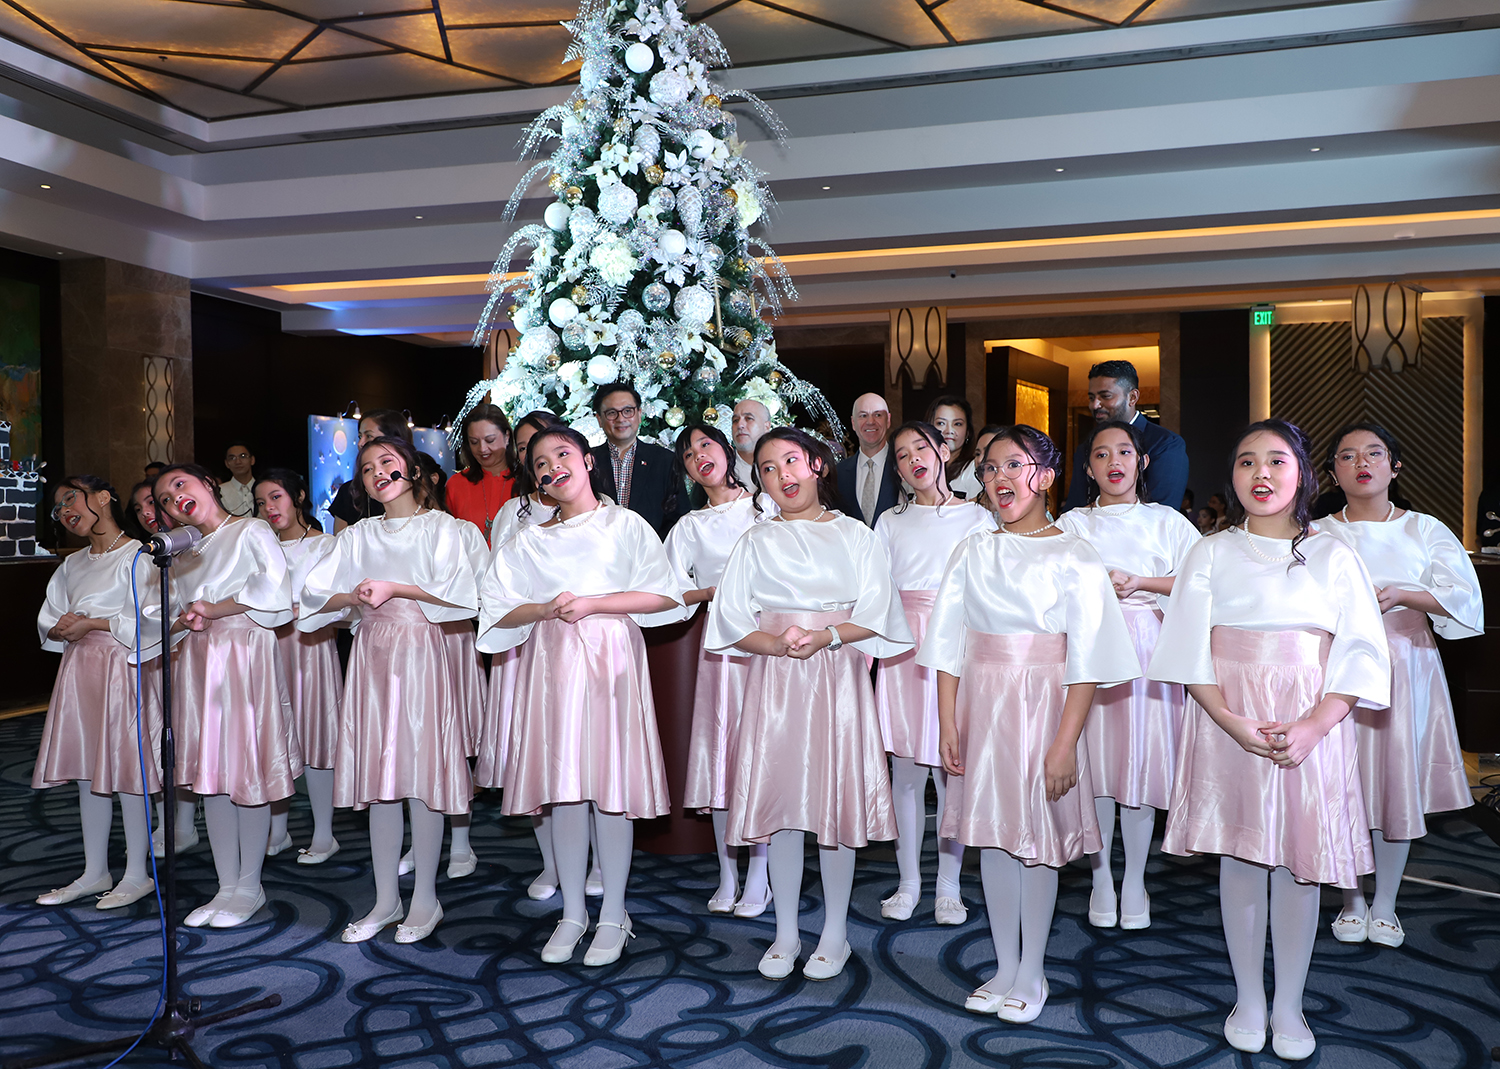 Christmas countdown shines and sparkles at Crimson Filinvest Hotel